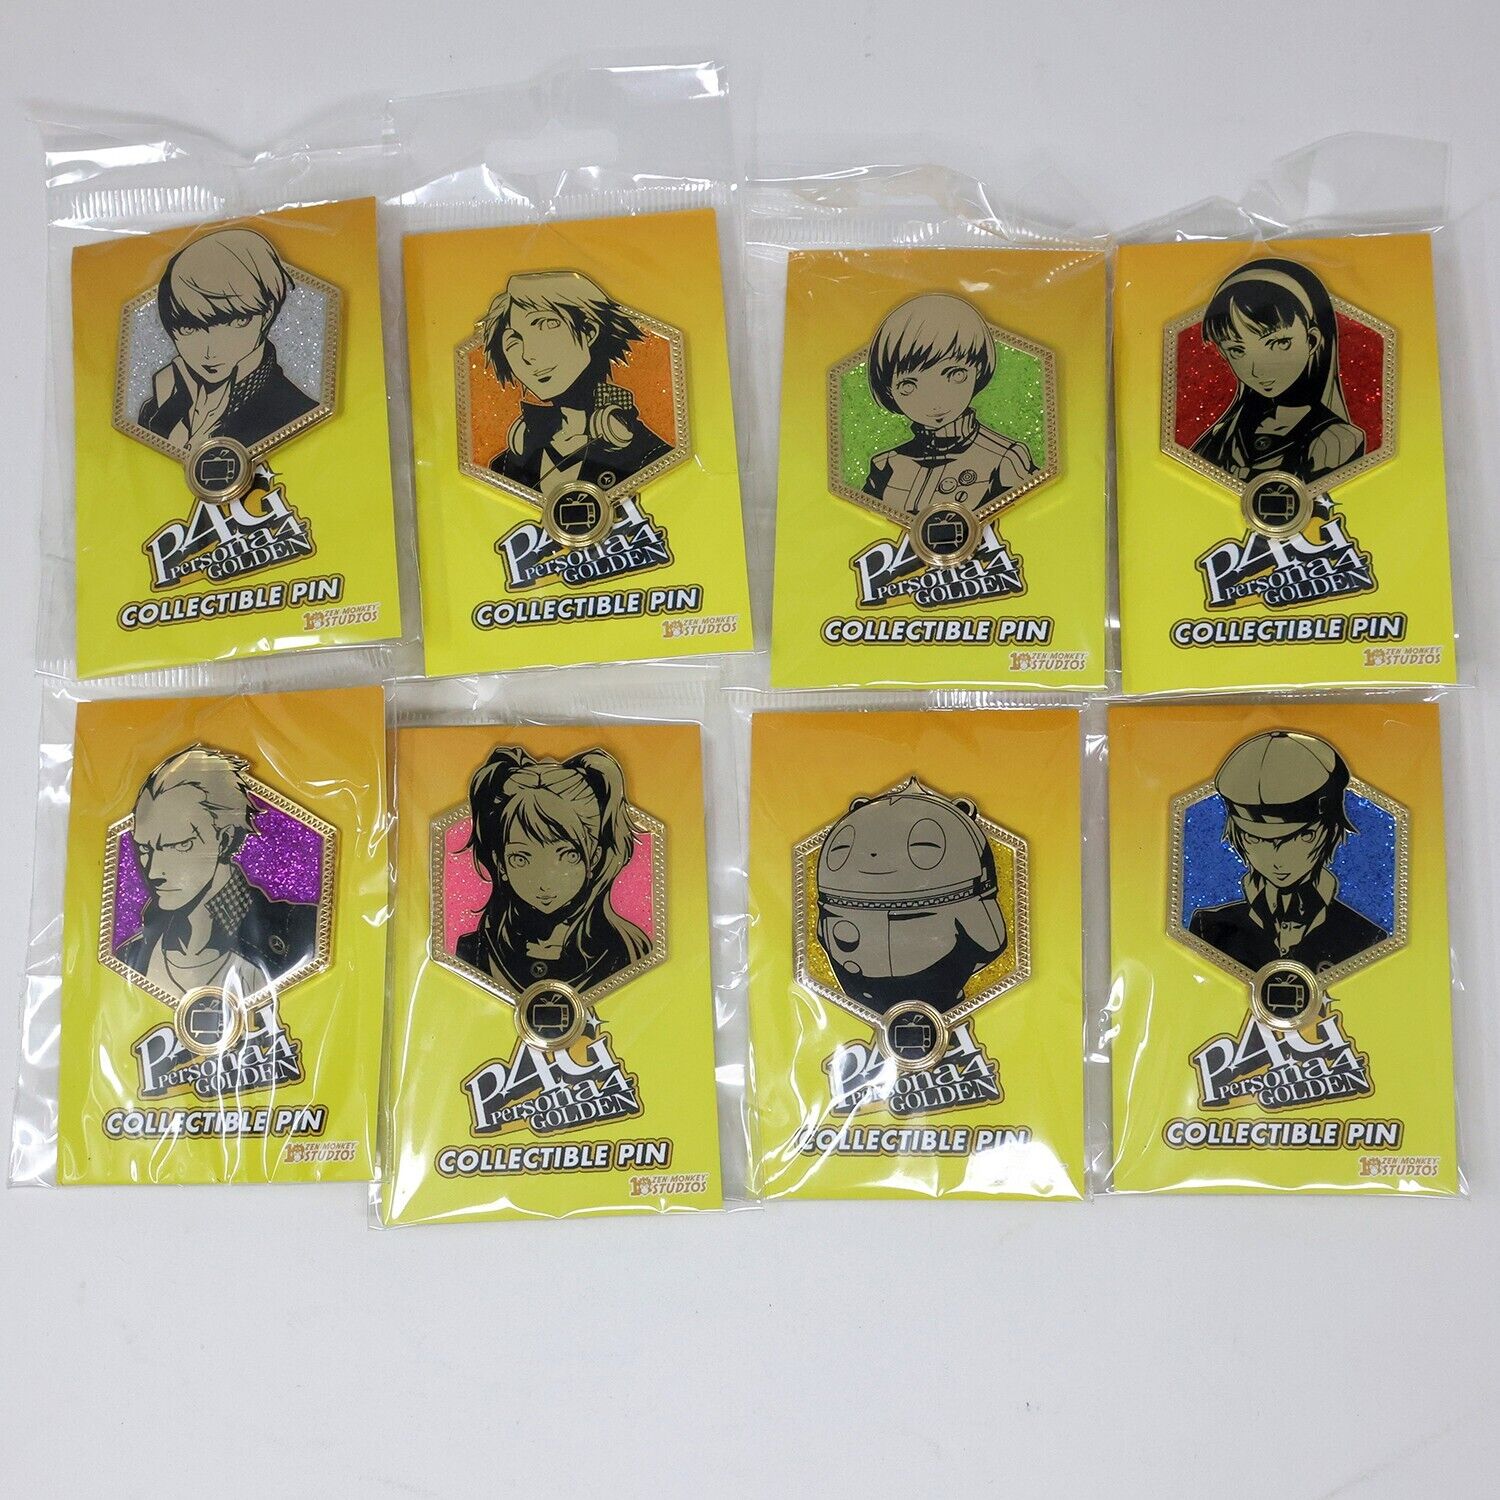 Persona 4 Golden Investigation Team Enamel Pins Set of 8 Official Collectibles